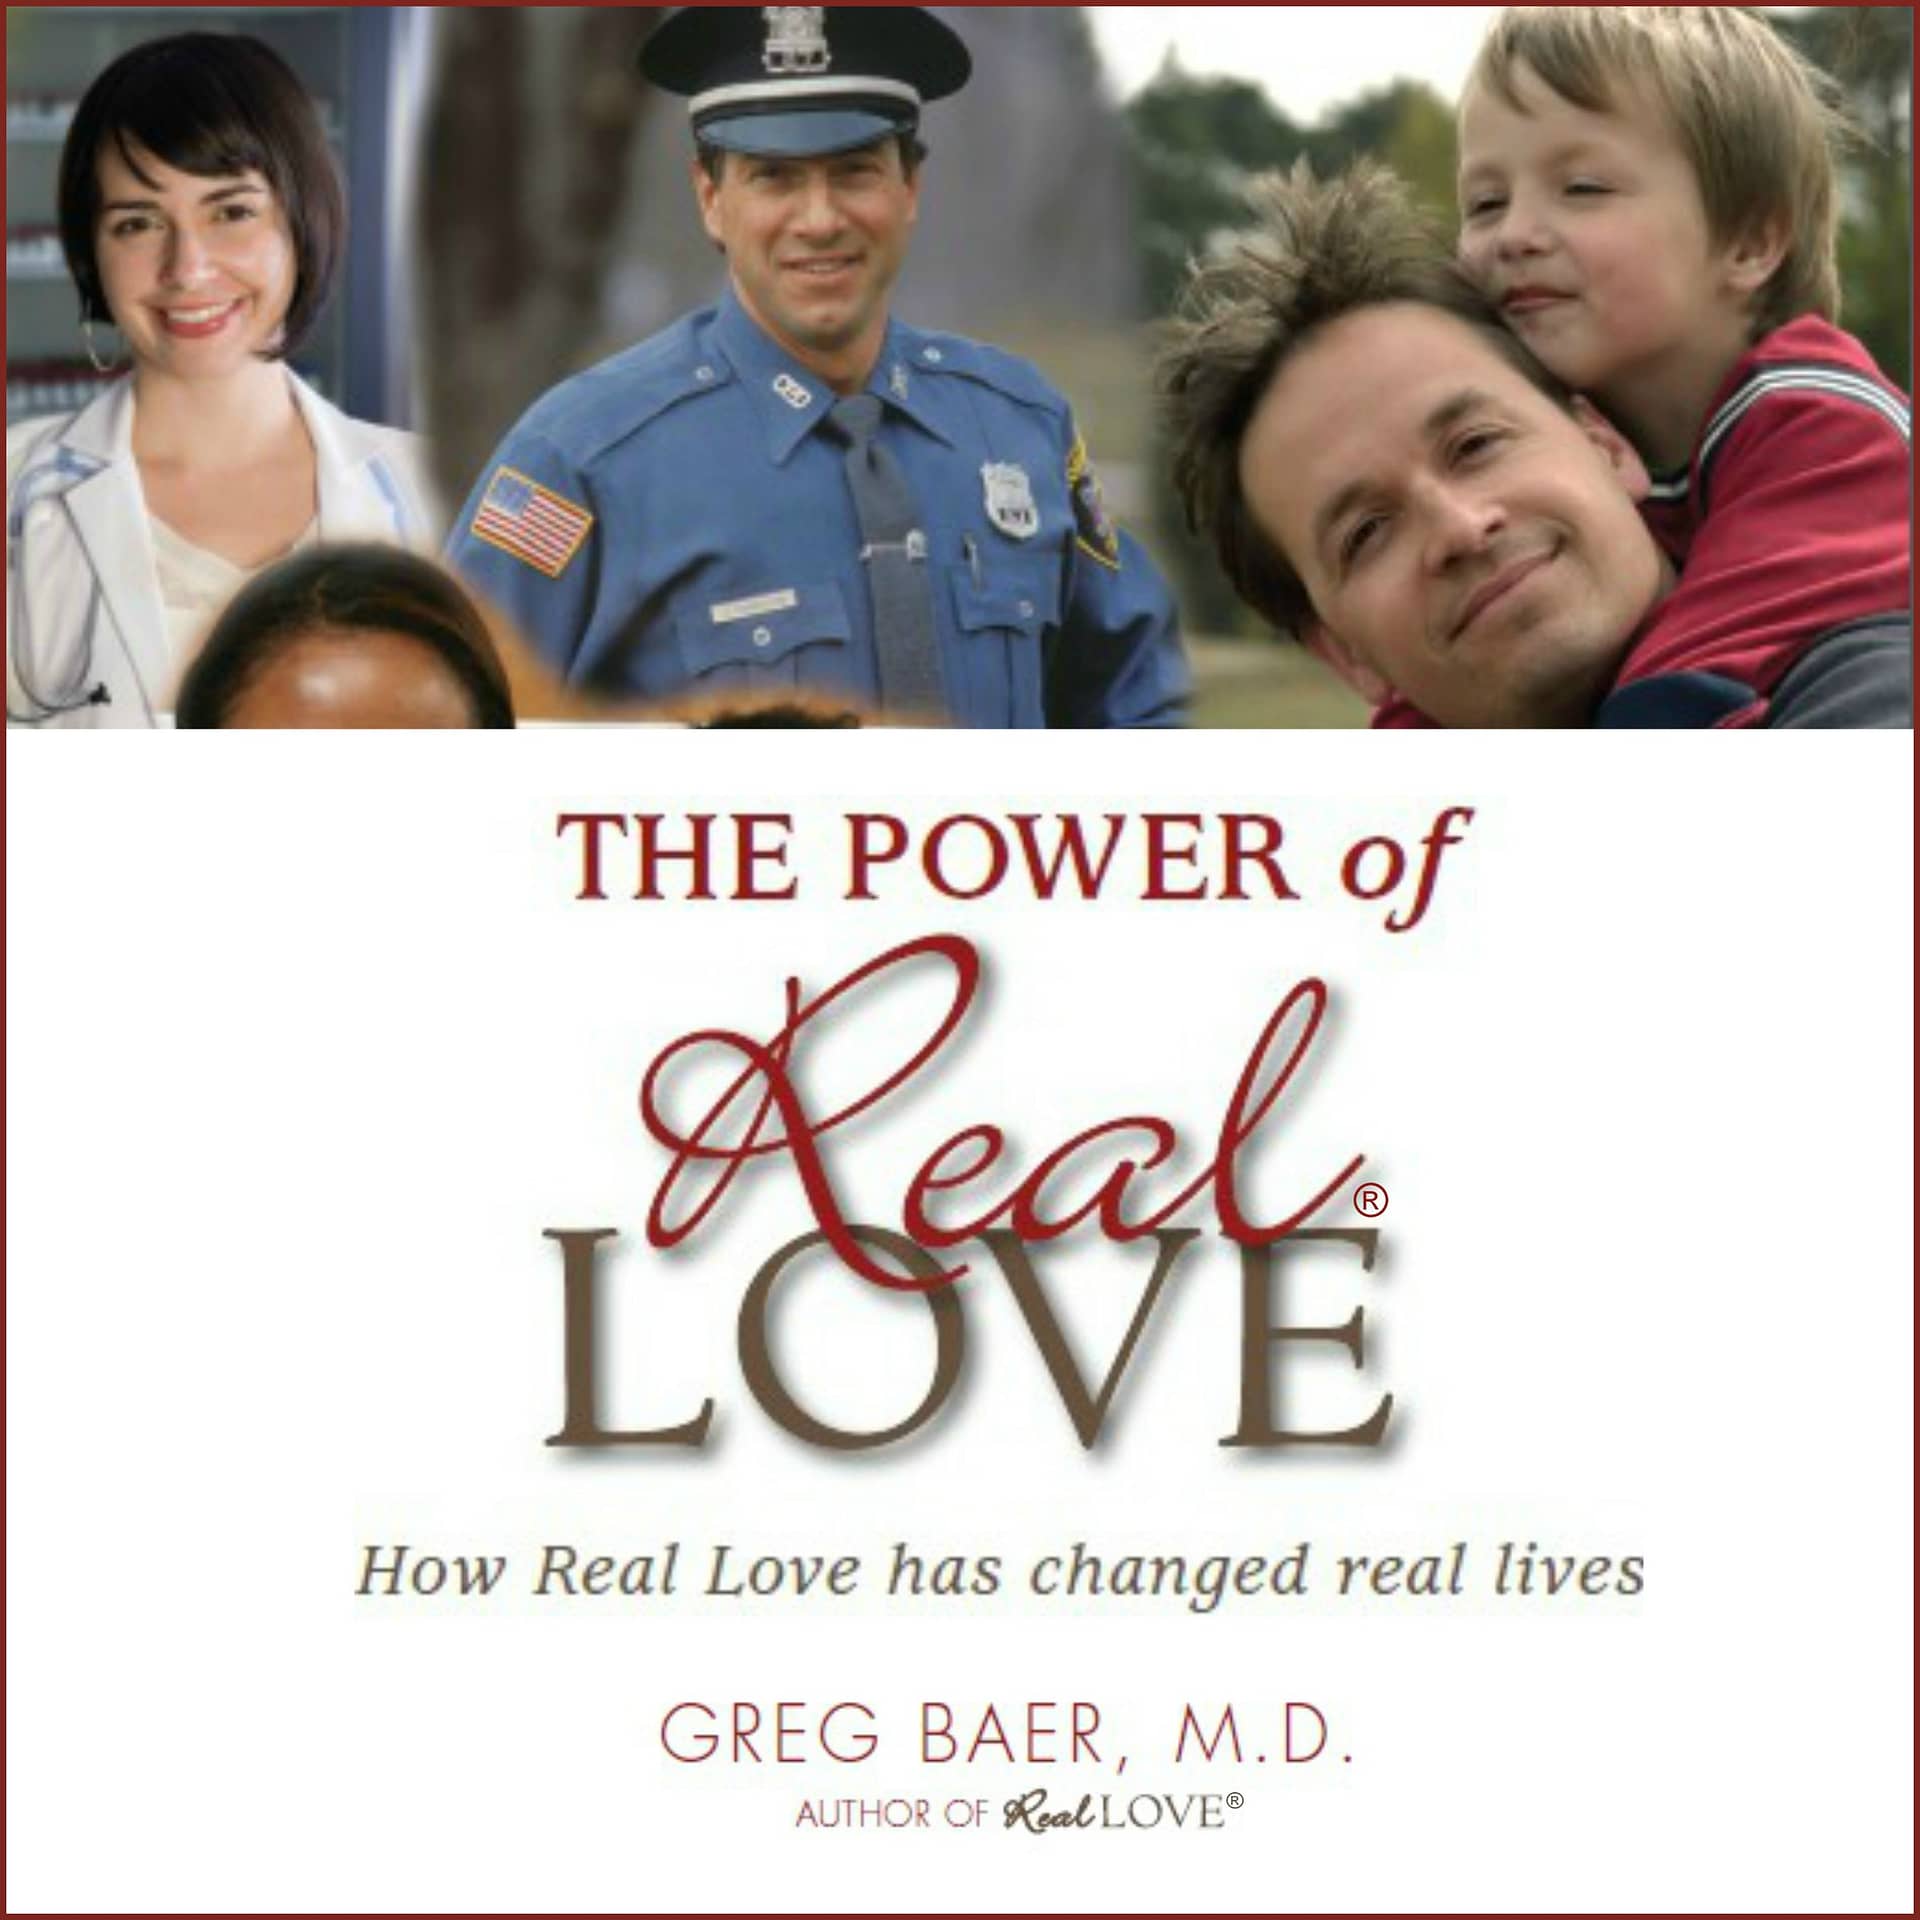 Cover of the Power of Real Love